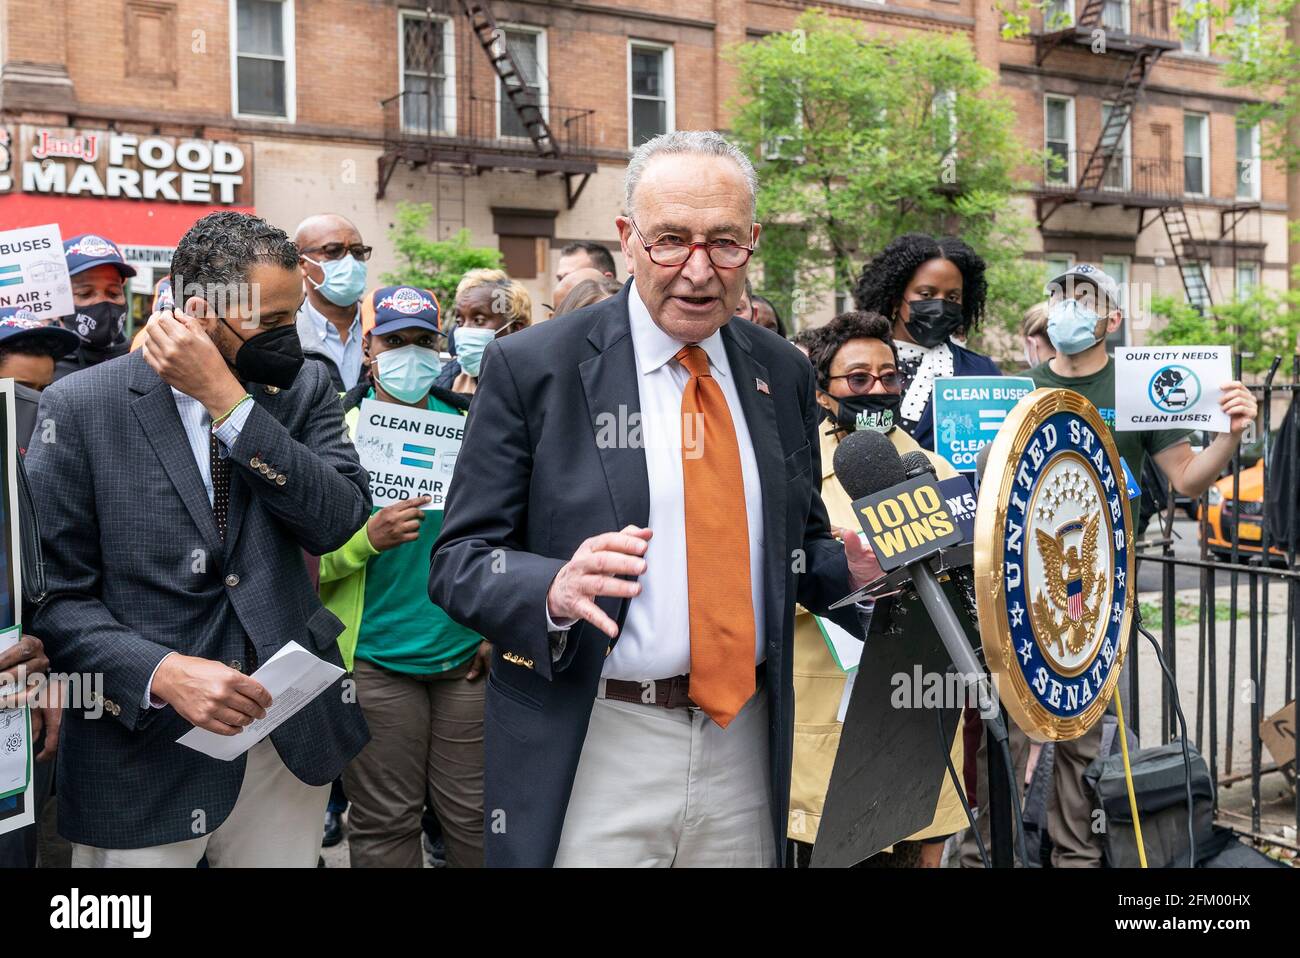 https://c8.alamy.com/comp/2FM00HX/new-york-united-states-04th-may-2021-senate-majority-leader-charles-schumer-pushes-plan-to-transform-public-transportation-with-green-buses-at-tuskegee-airmen-bus-depot-senator-pushes-a-new-plan-called-clean-transit-for-america-to-replace-diesel-spewing-fleet-buses-with-zero-emission-electric-or-hydrogen-buses-this-plan-is-a-part-of-president-bidens-american-jobs-plan-senator-stated-that-70000-mass-transit-buses-across-the-country-need-to-be-replaced-photo-by-lev-radinpacific-press-credit-pacific-press-media-production-corpalamy-live-news-2FM00HX.jpg